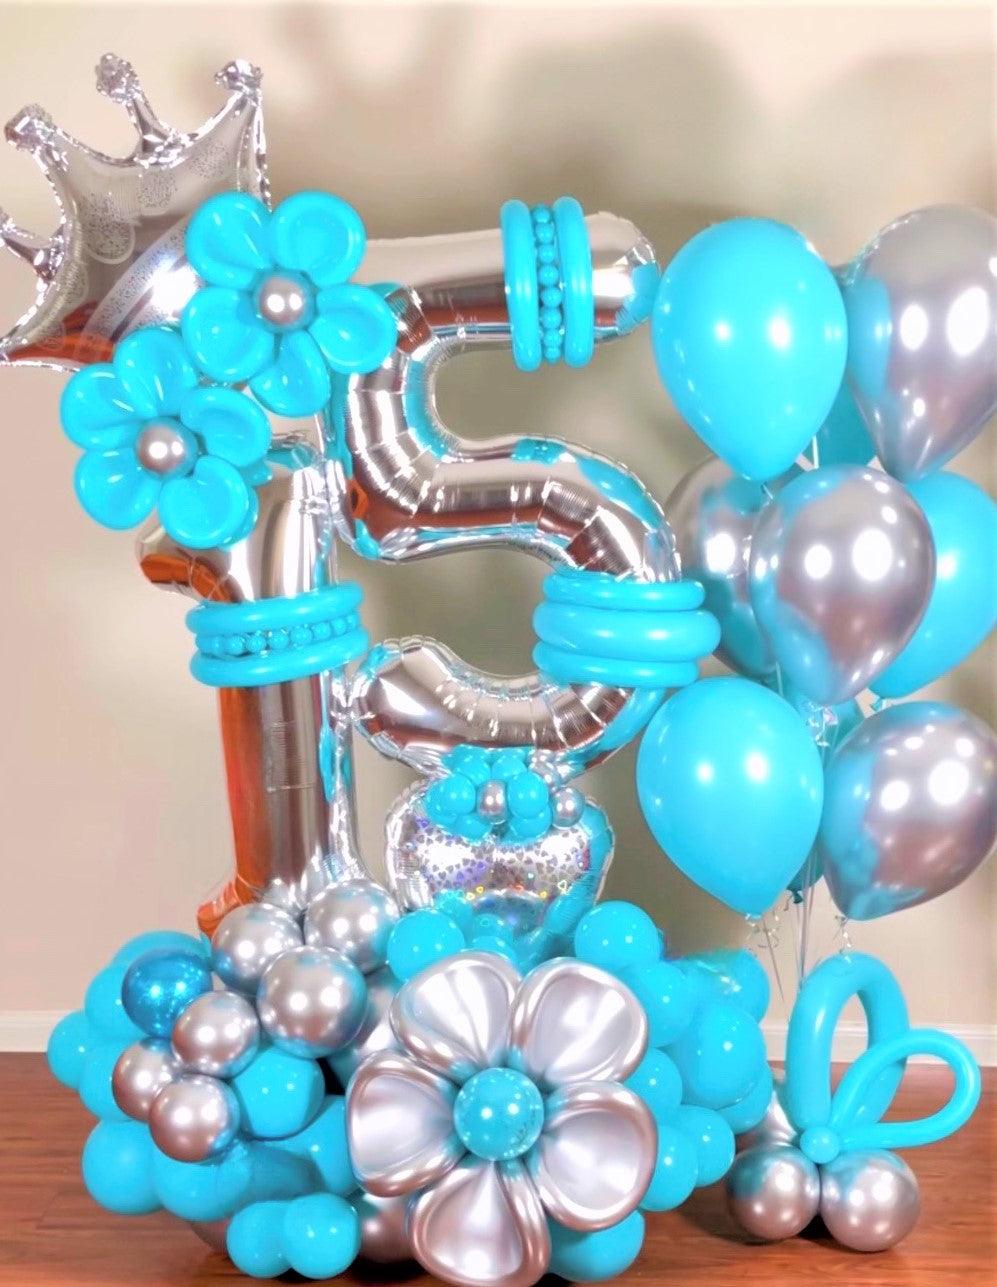 Blue Balloon Bouquet  with Crown